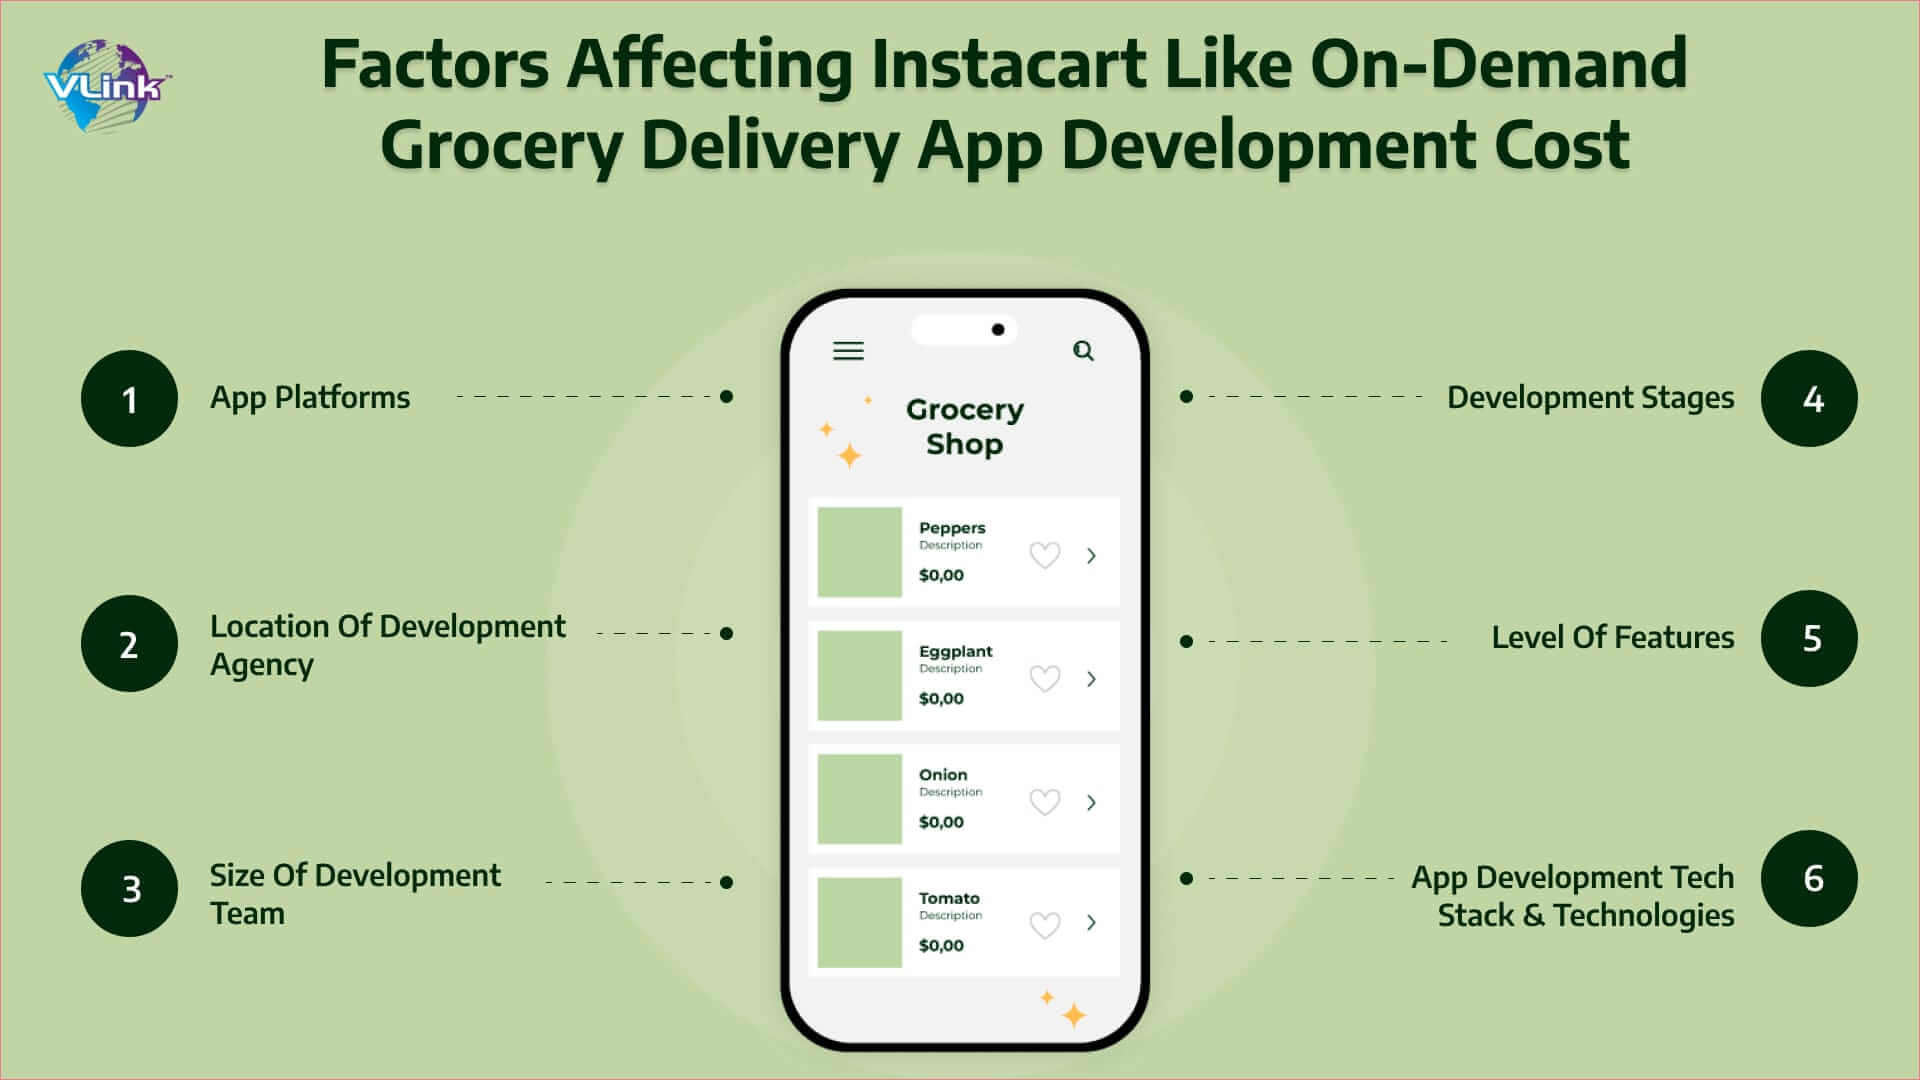 Factors That Affect the Cost of Building a Grocery Delivery App Like Instacart